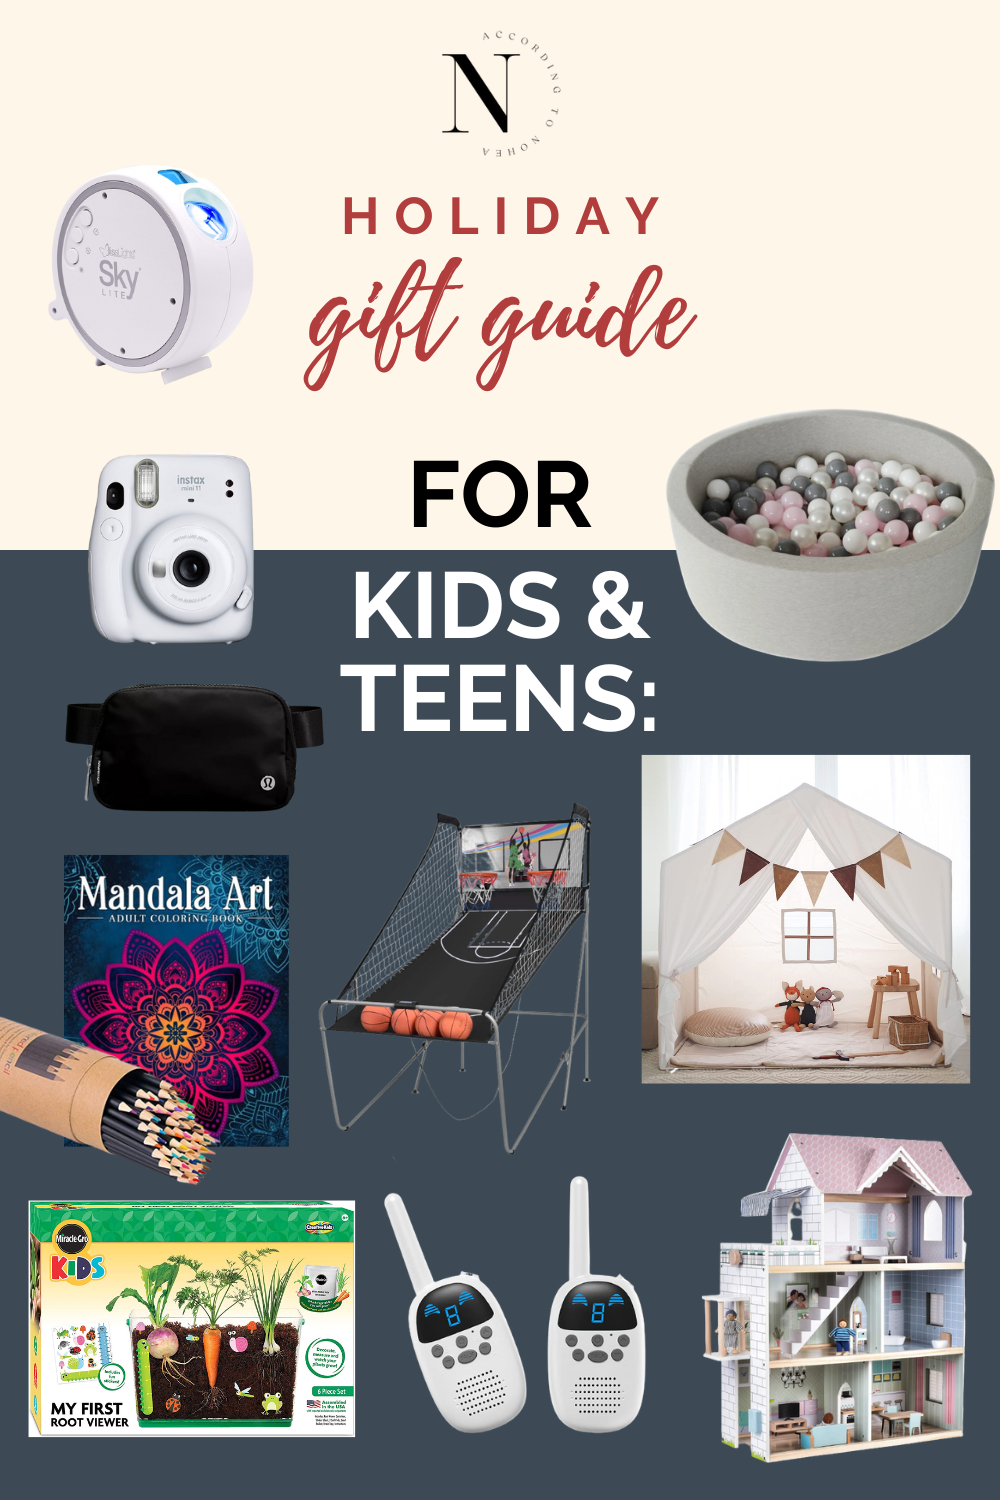 2022 Holiday Gift Guide: Gifts for Her - The Small Things Blog